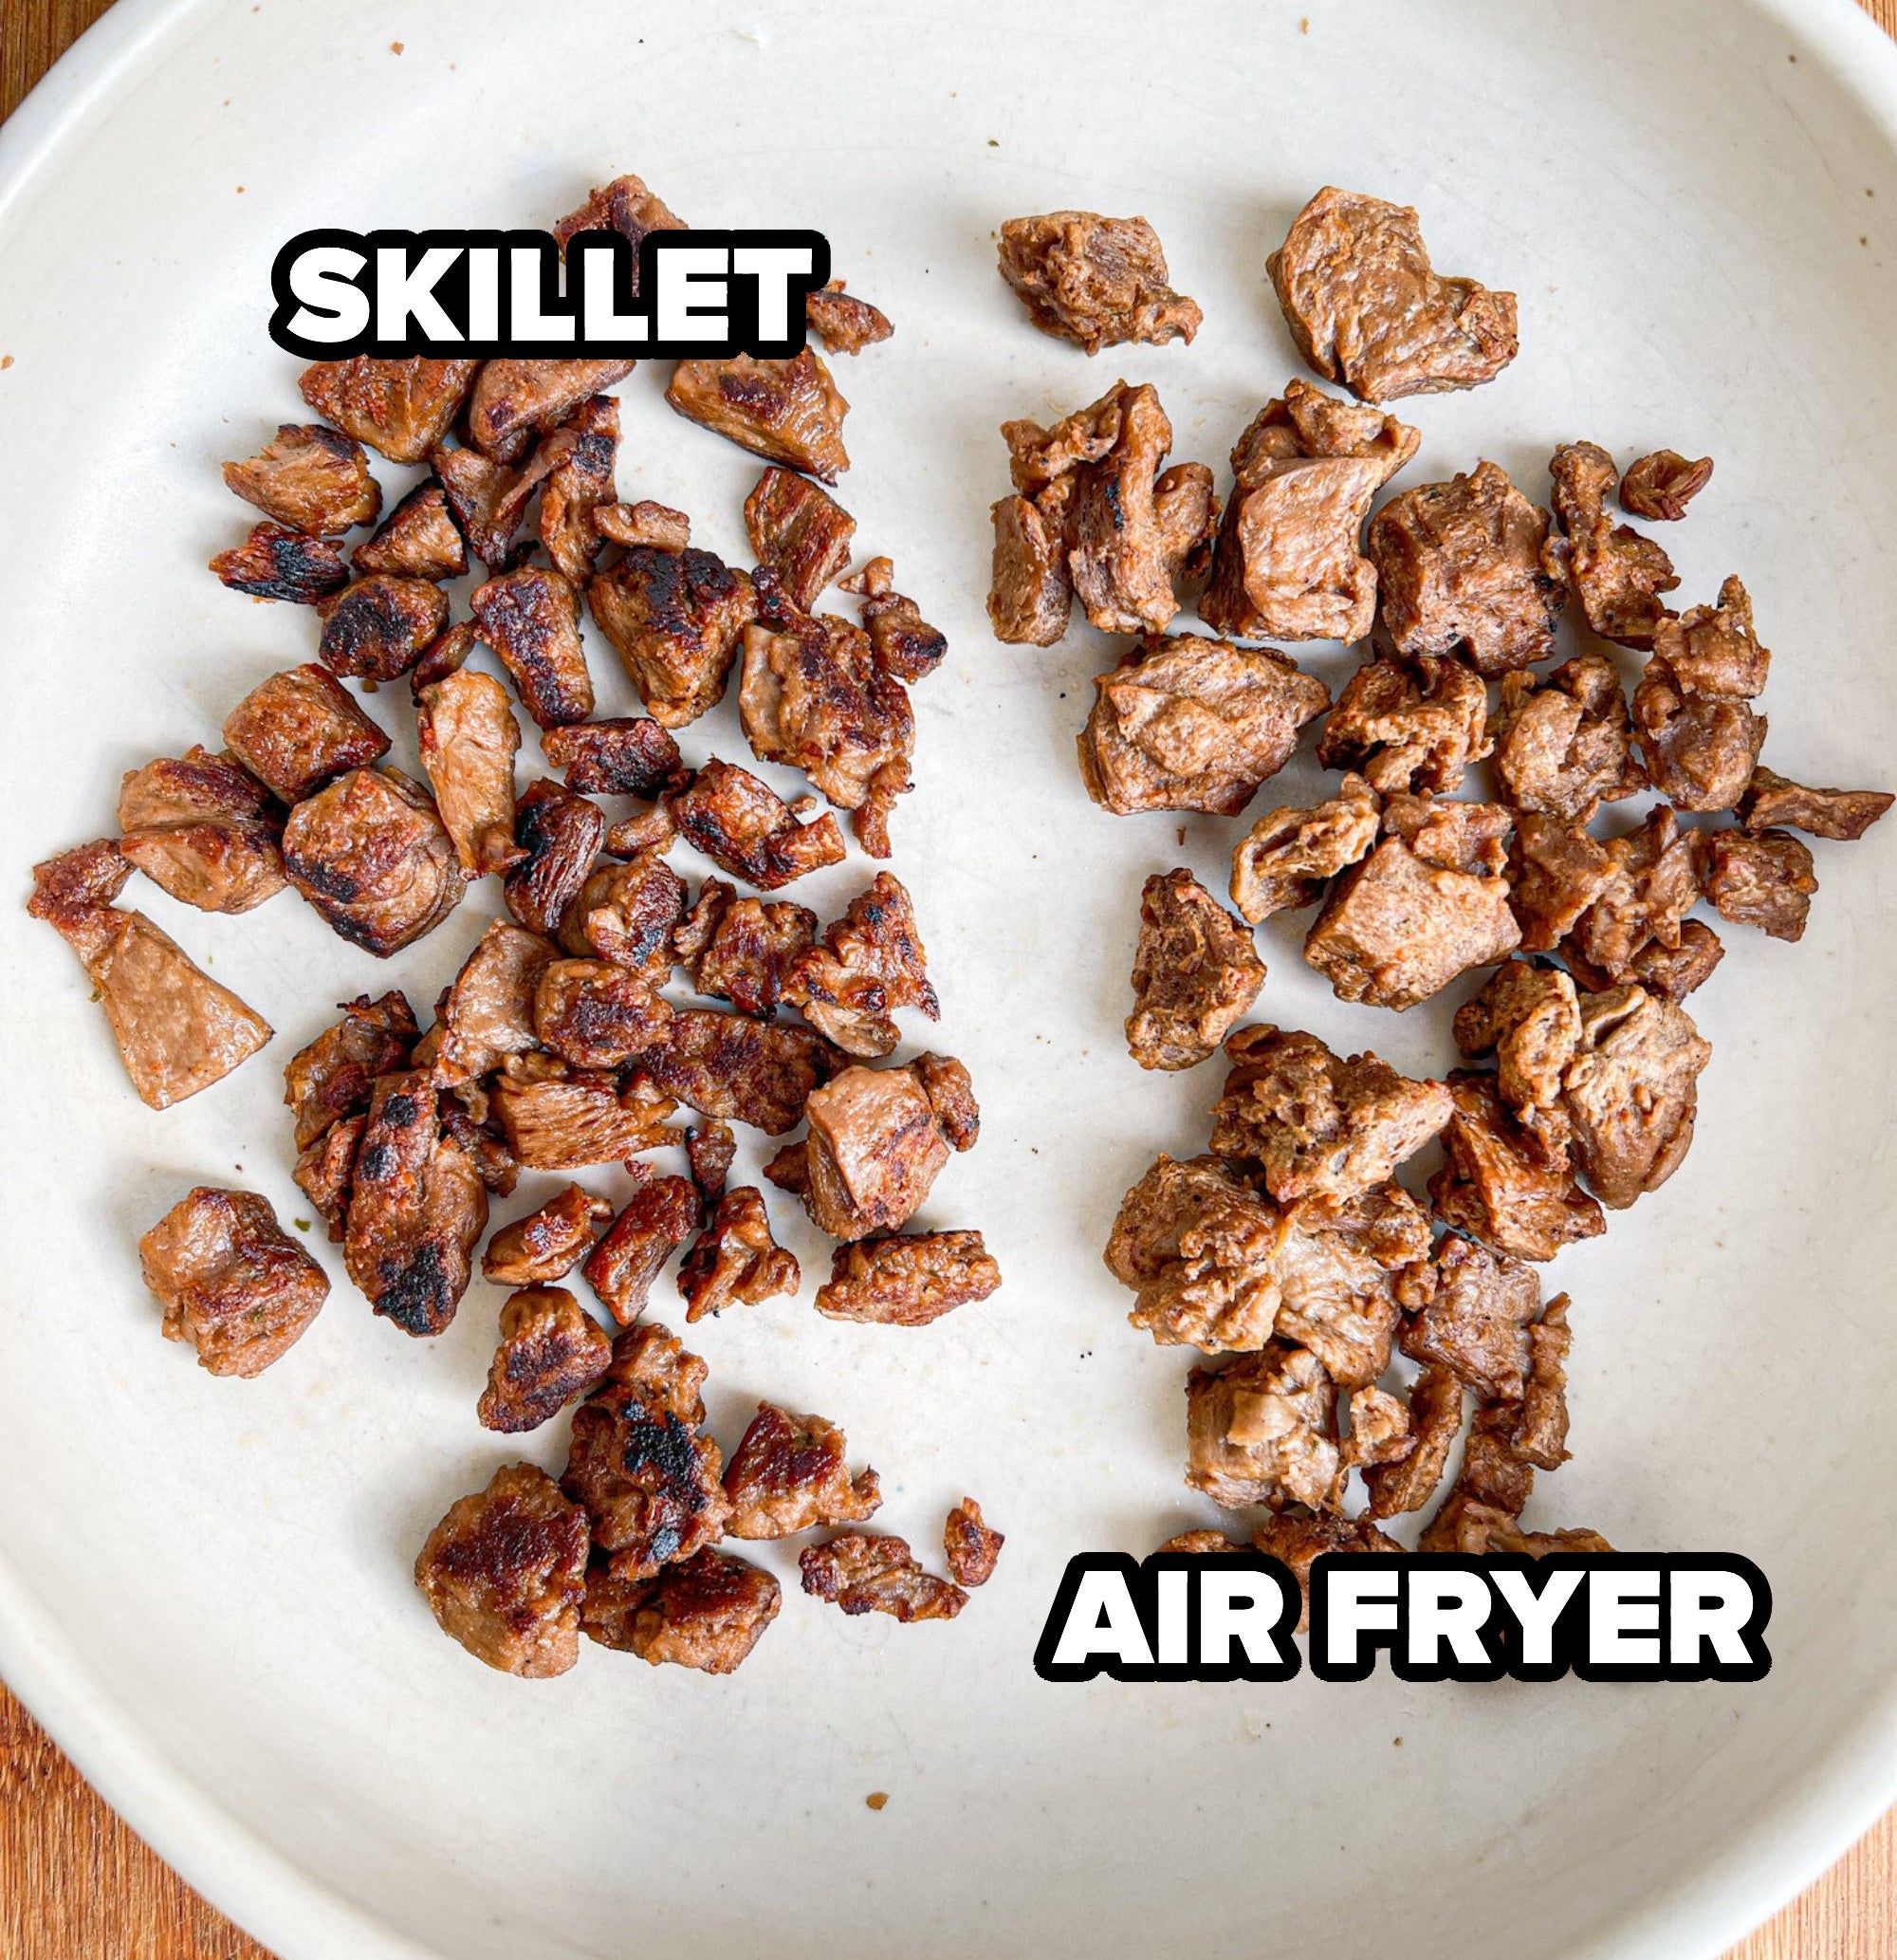 skillet vs air fryer beyond steak pieces - the skillet ones are better seared and more brown than the air fryer ones